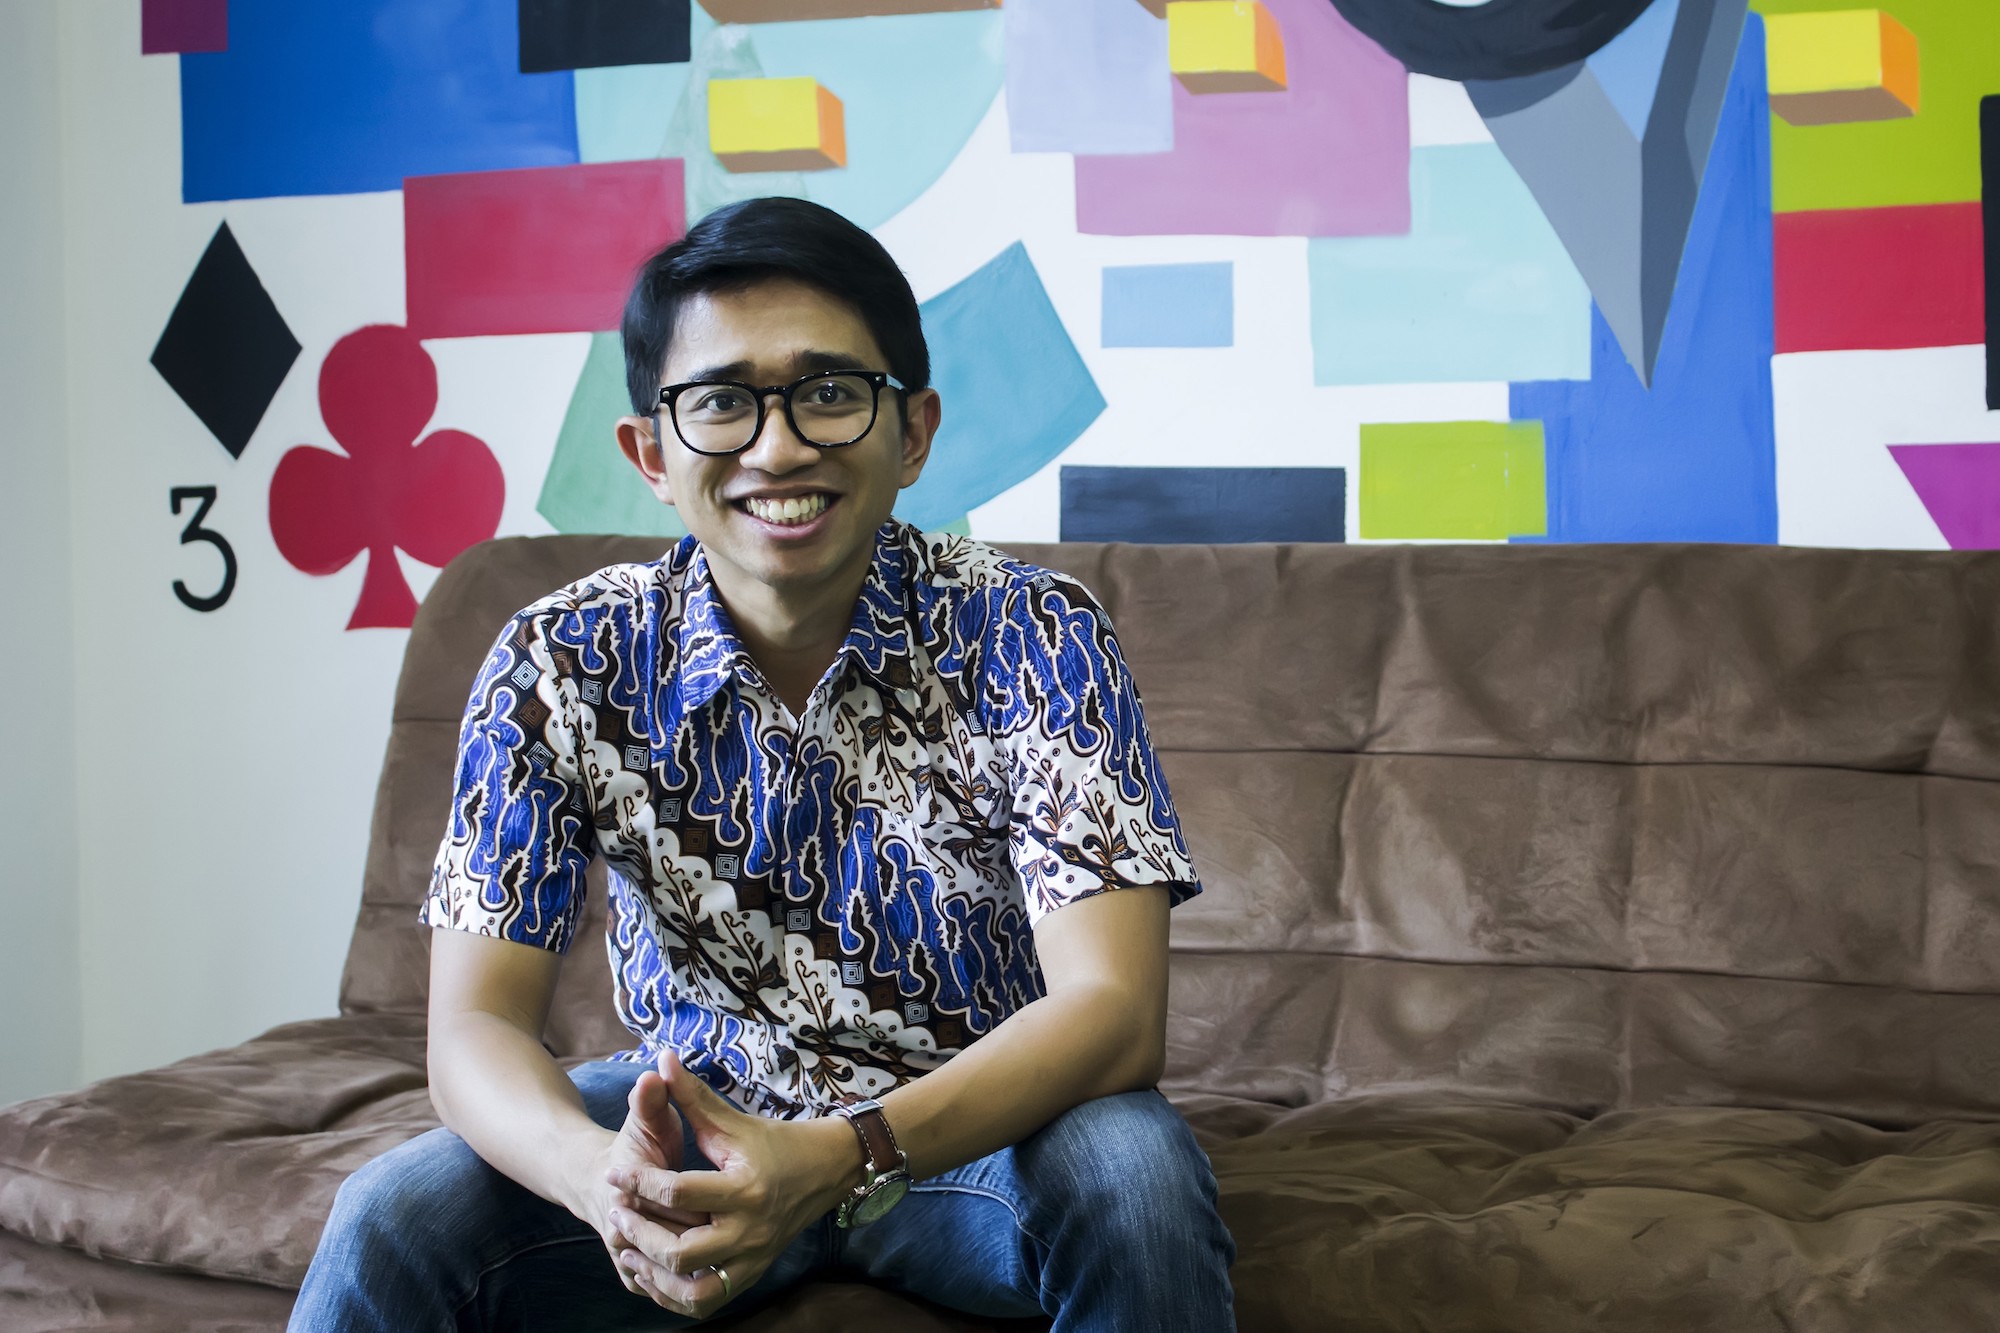 Kudo CEO Agung Nugroho: Growing with Grab to win in the Southeast Asian market